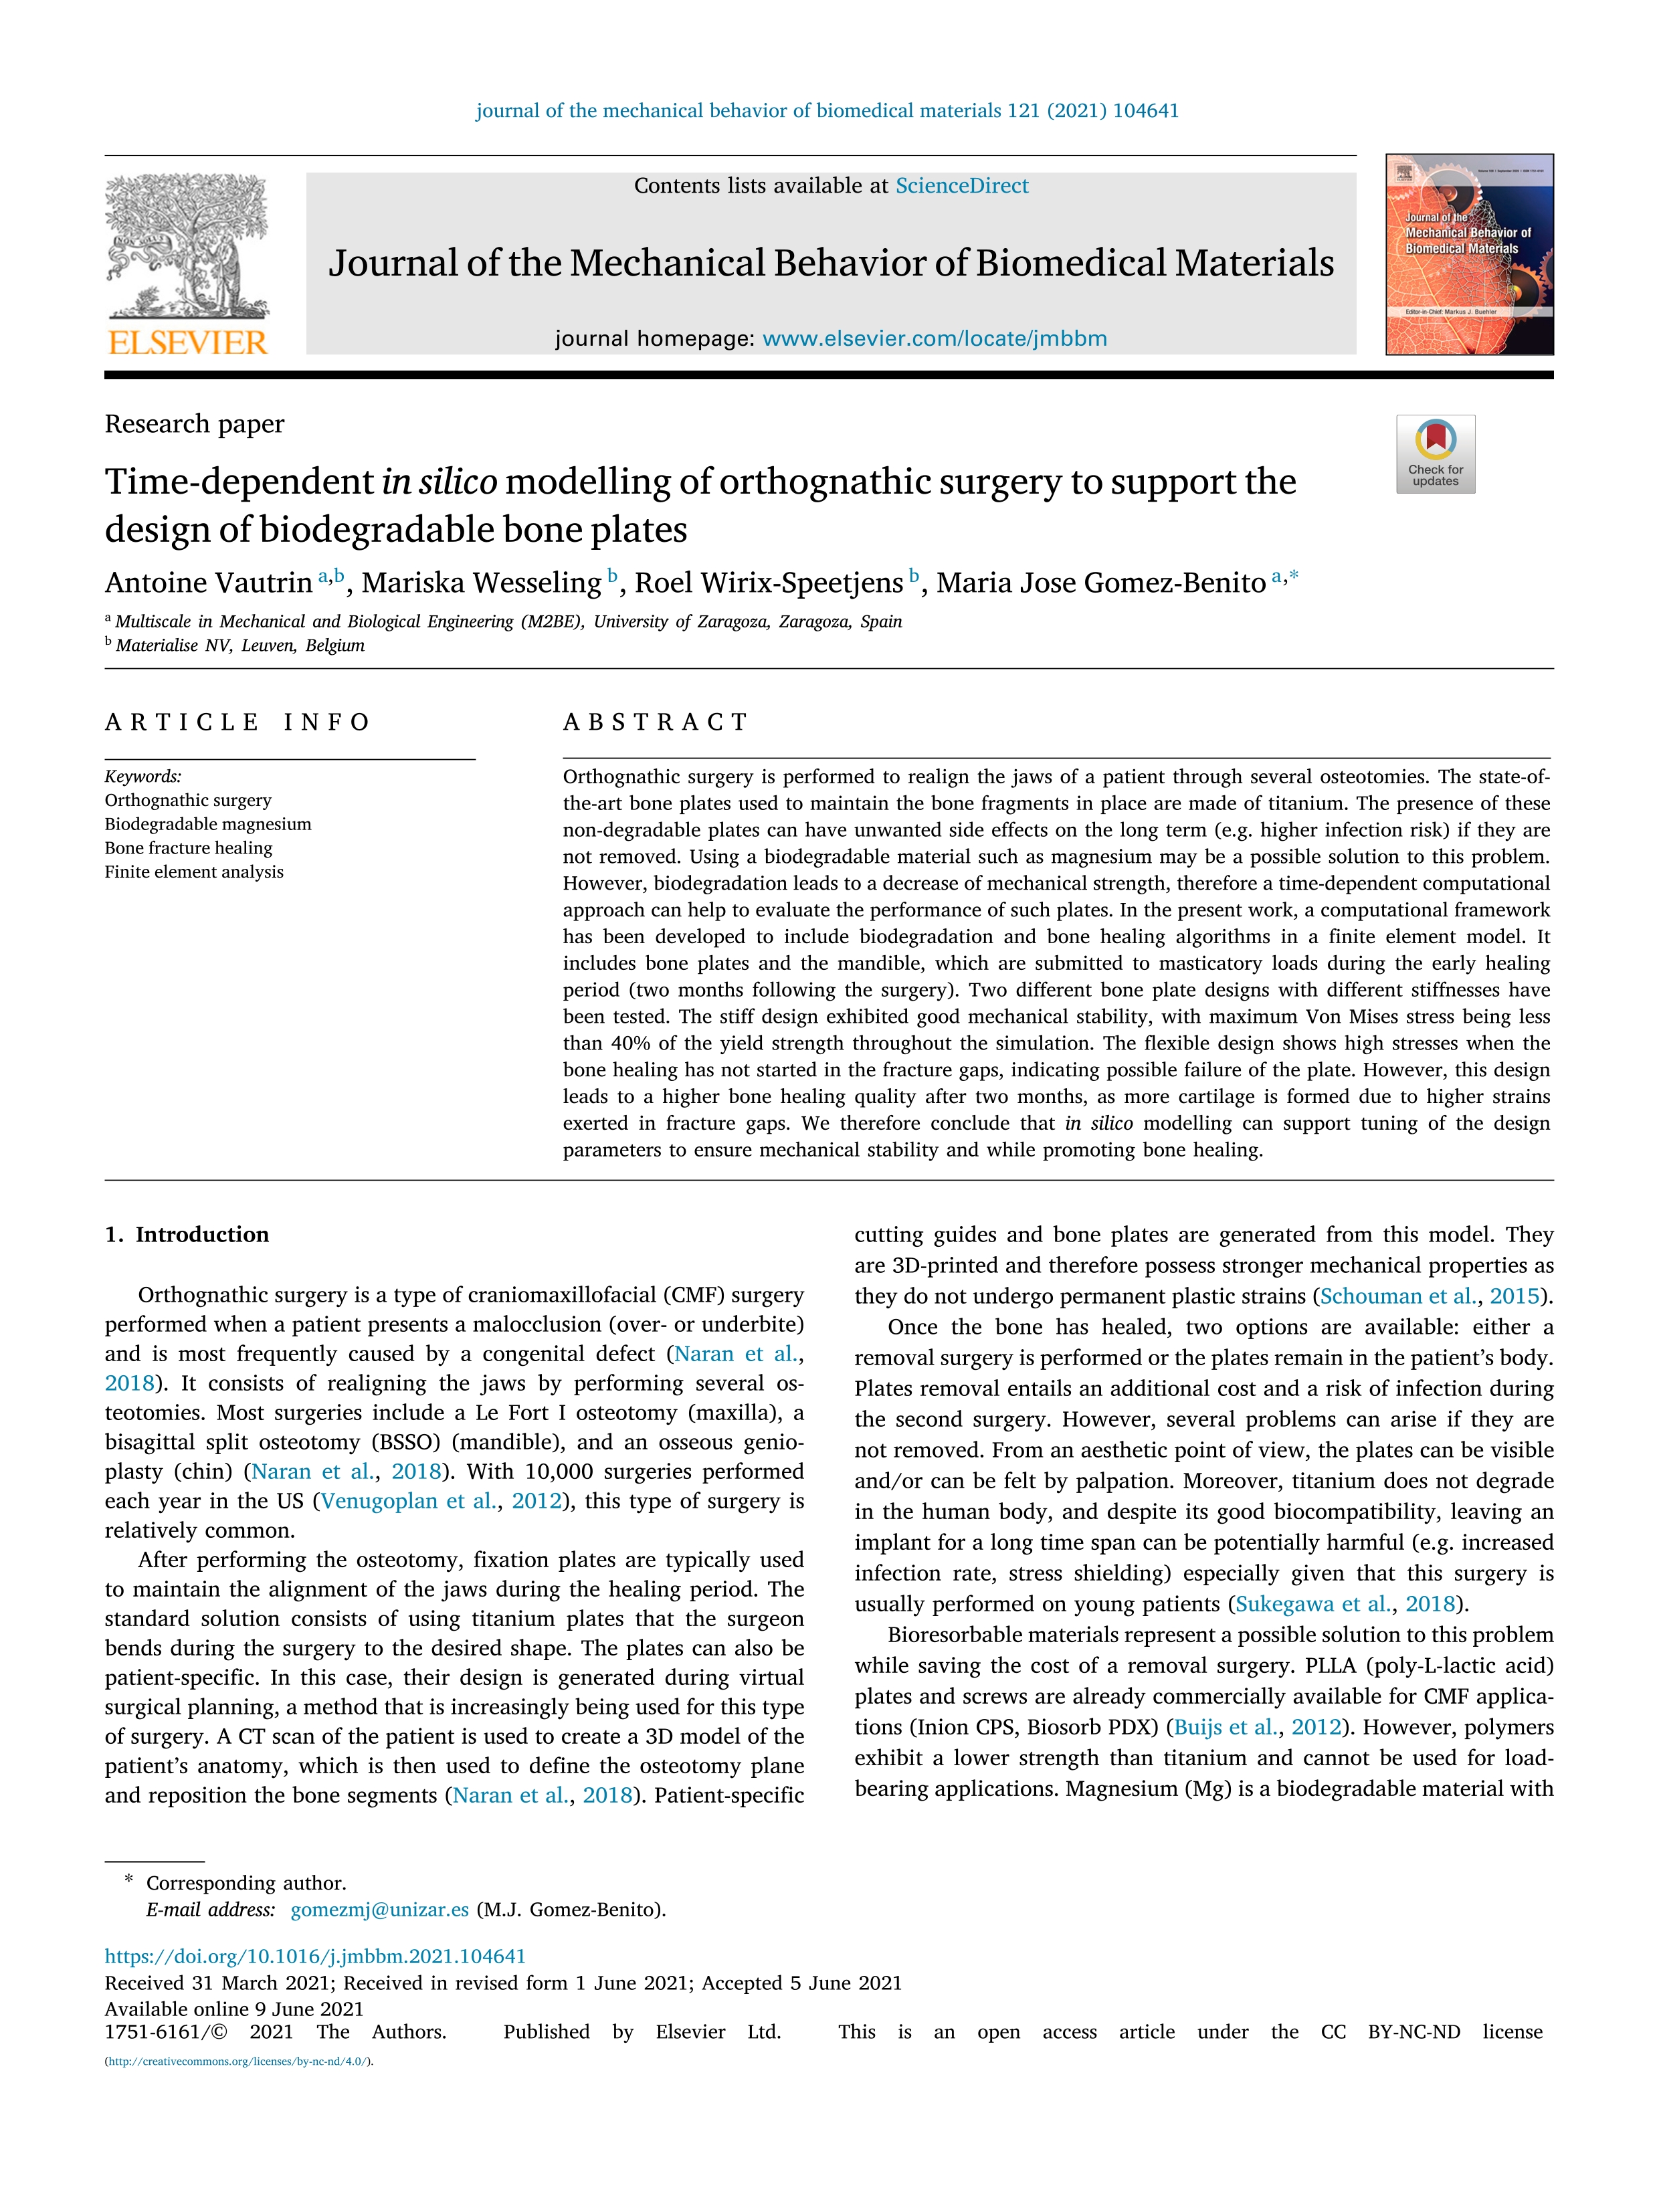 Time-dependent in silico modelling of orthognathic surgery to support the design of biodegradable bone plates